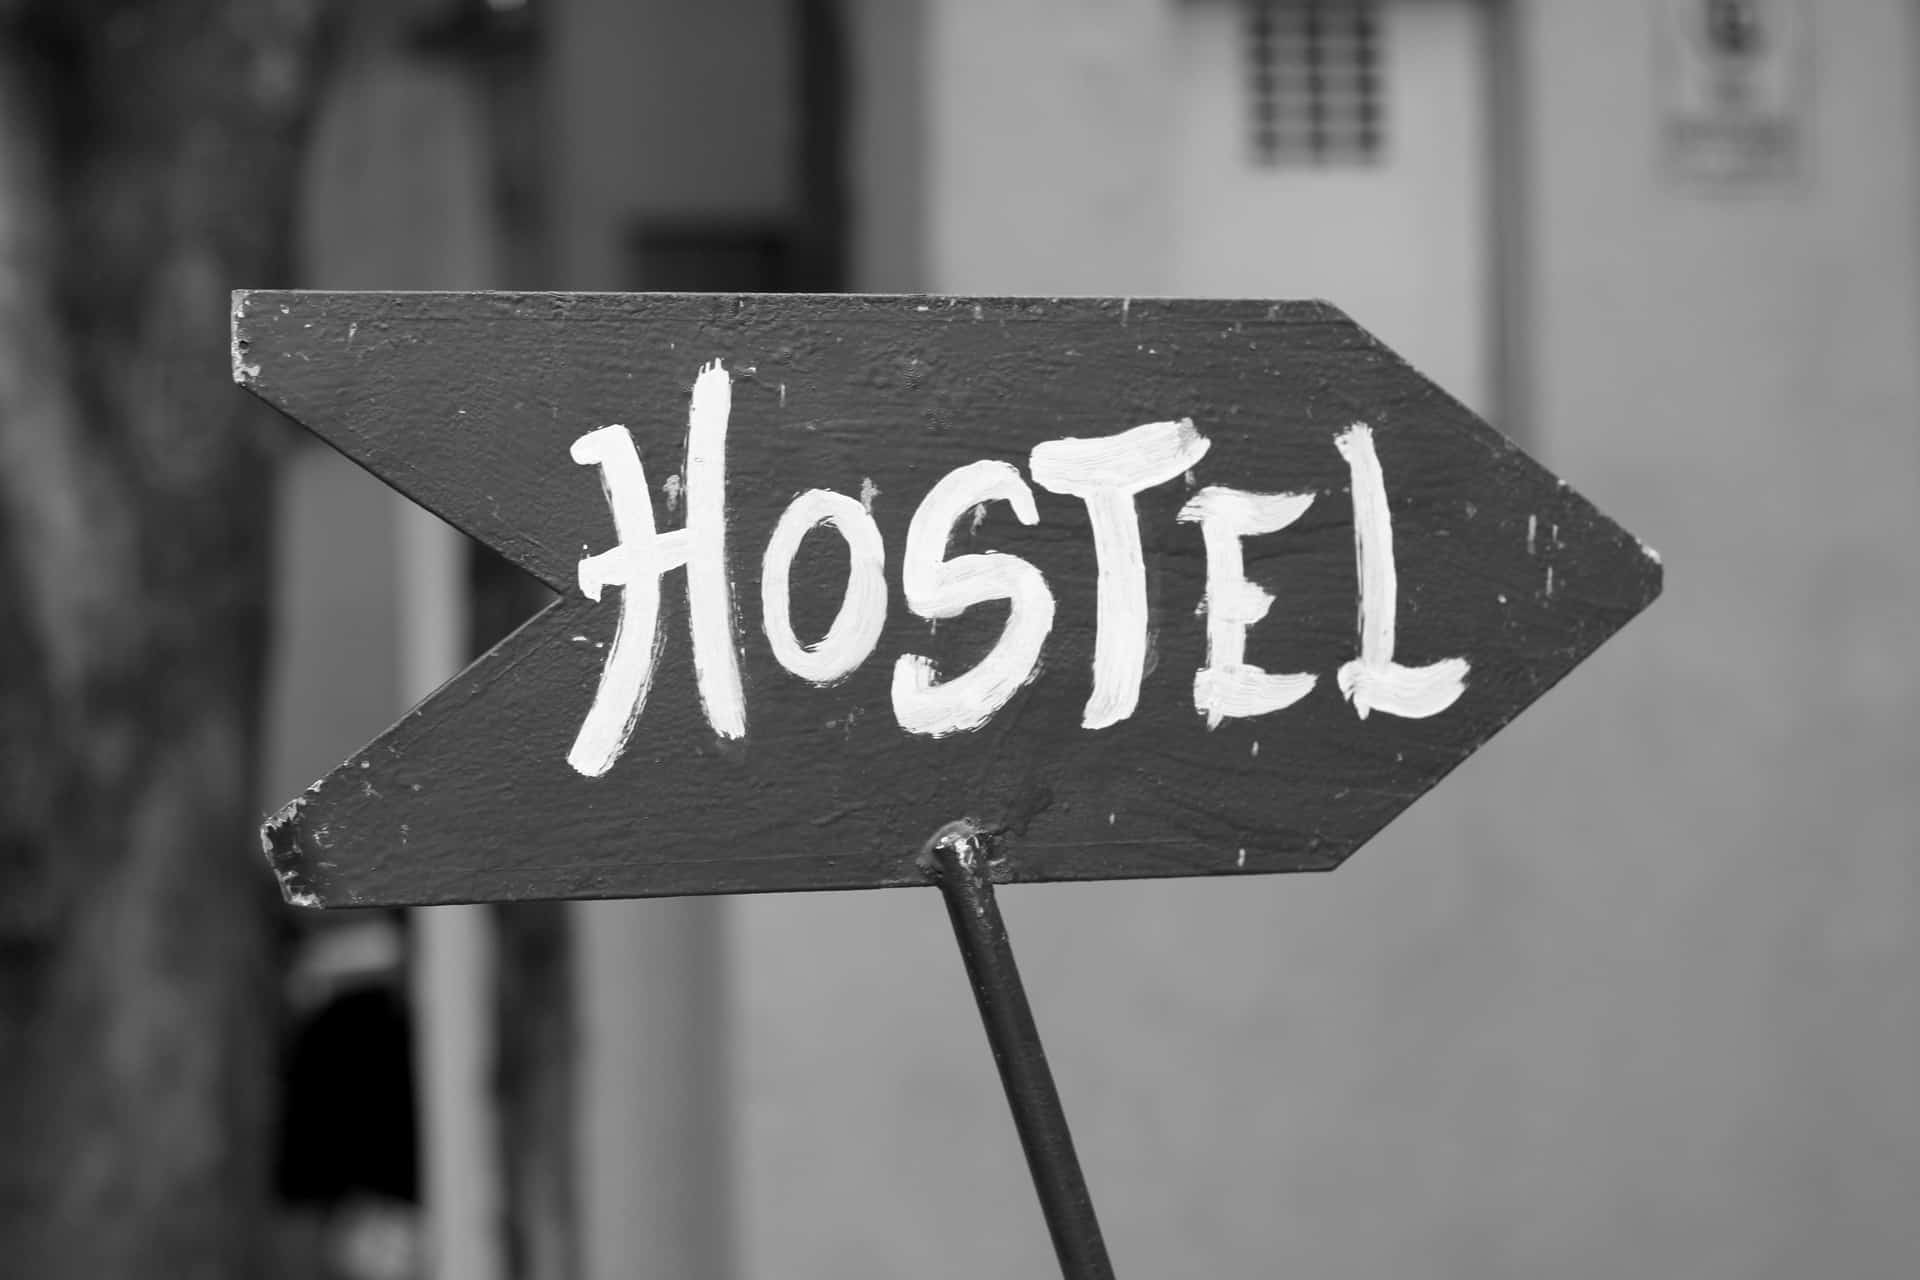 Hostels are great to make friends as a solo traveller